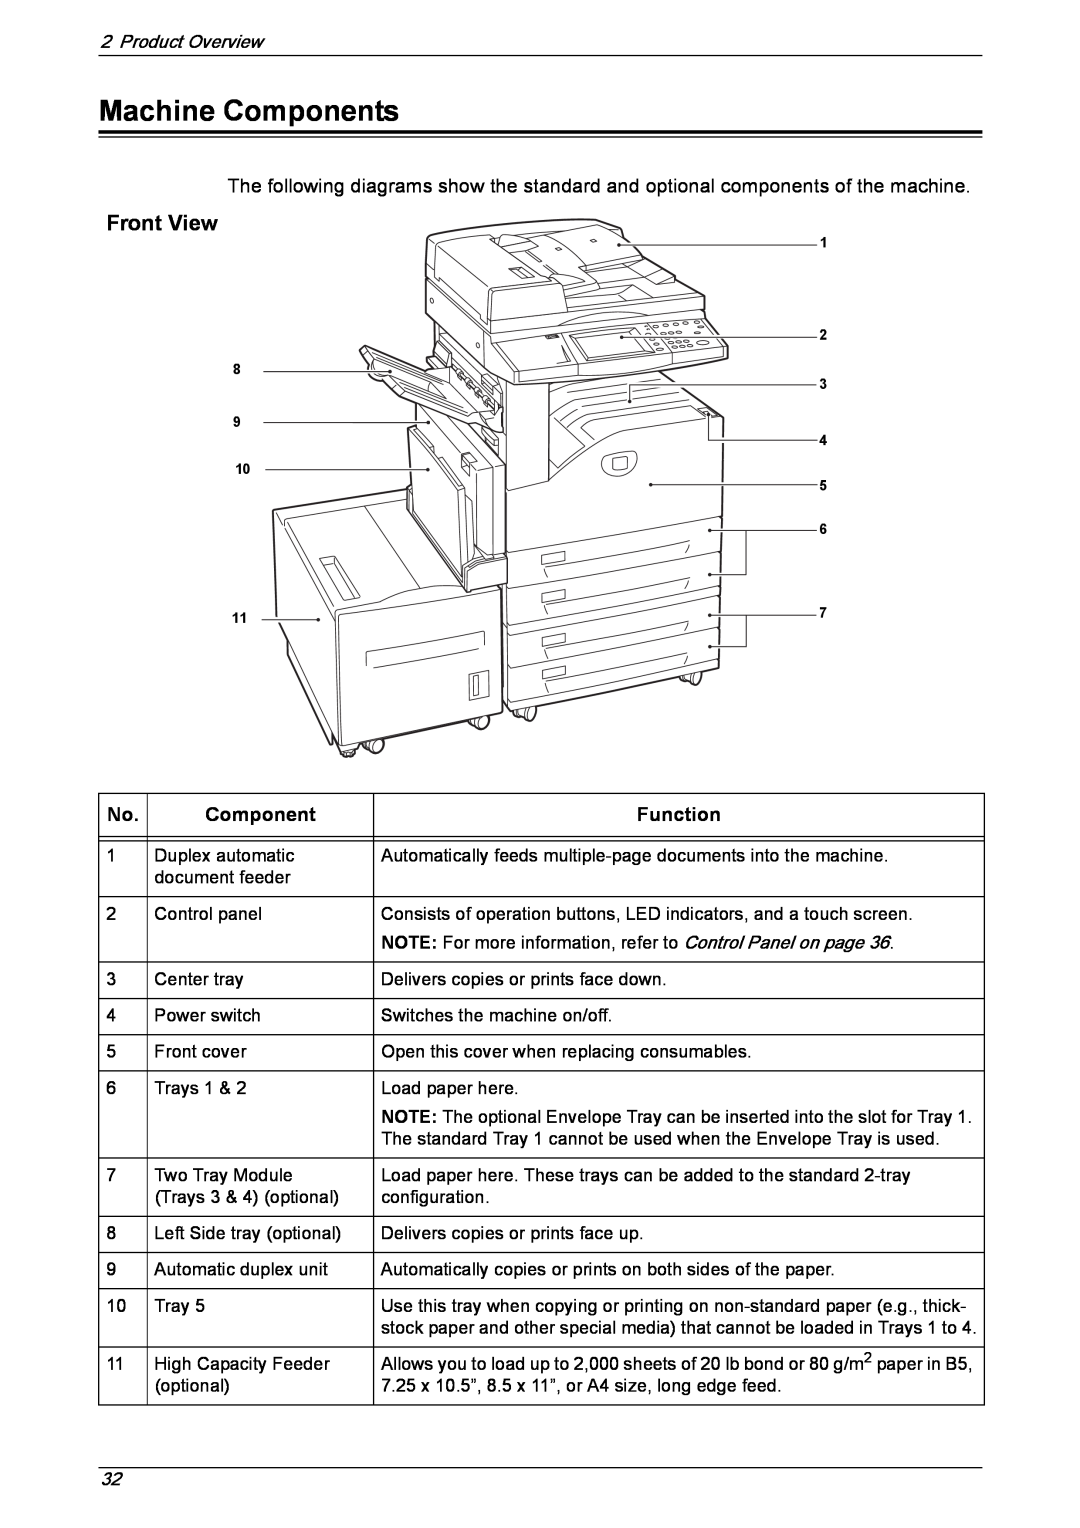 Xerox 5230 manual Machine Components, Front View, Function, Product Overview 